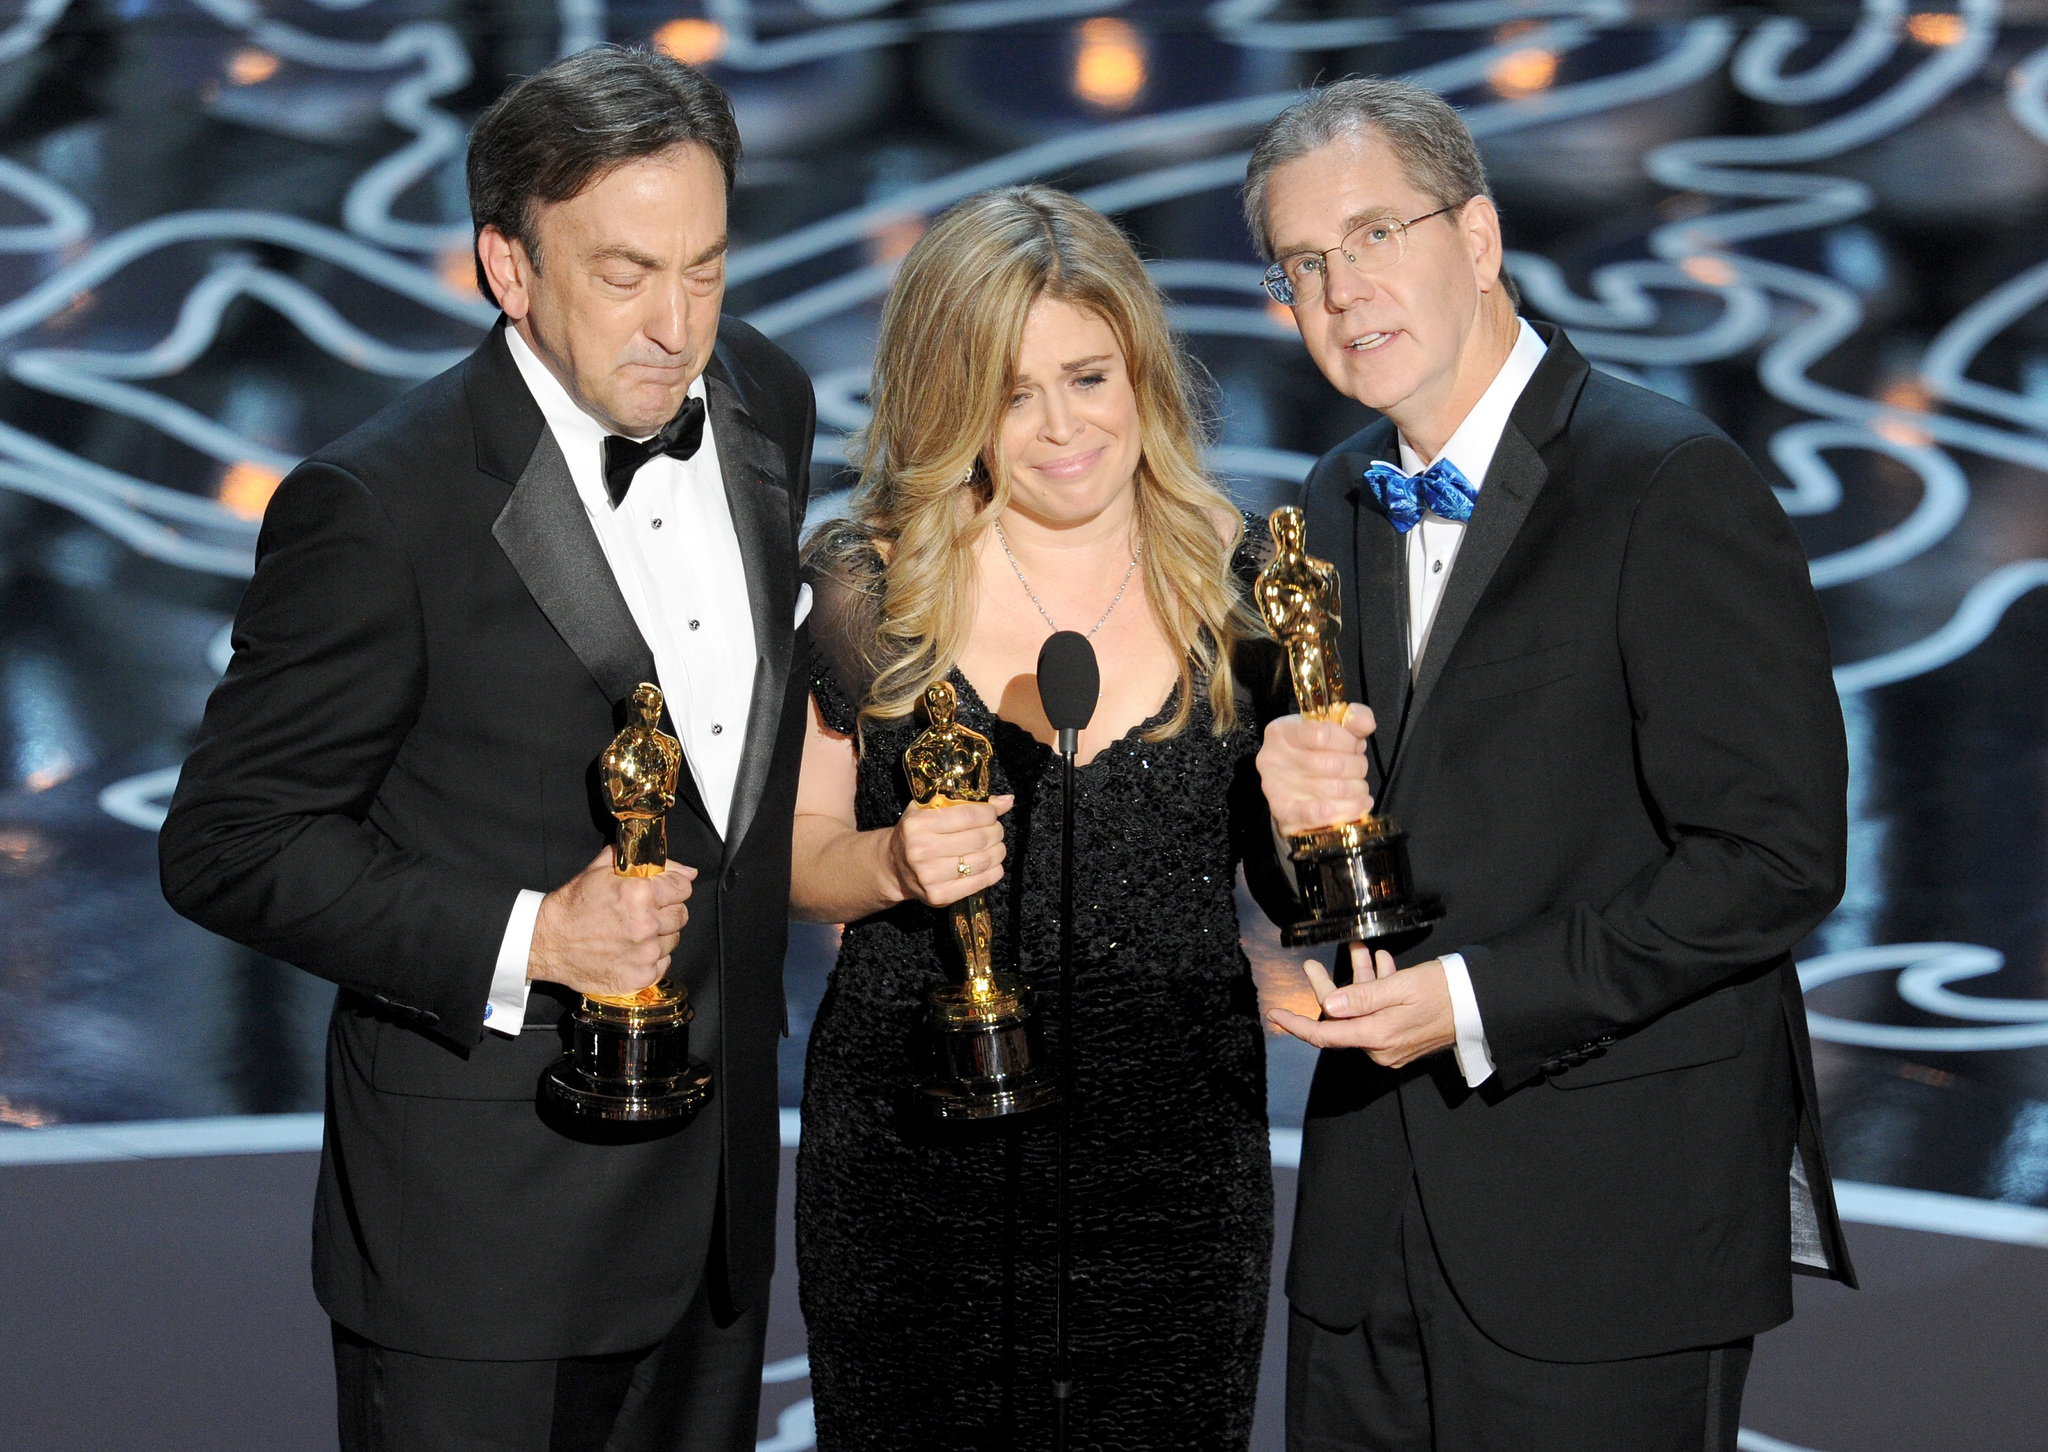 Chris Buck, Peter Del Vecho and Jennifer Lee at event of The Oscars (2014)